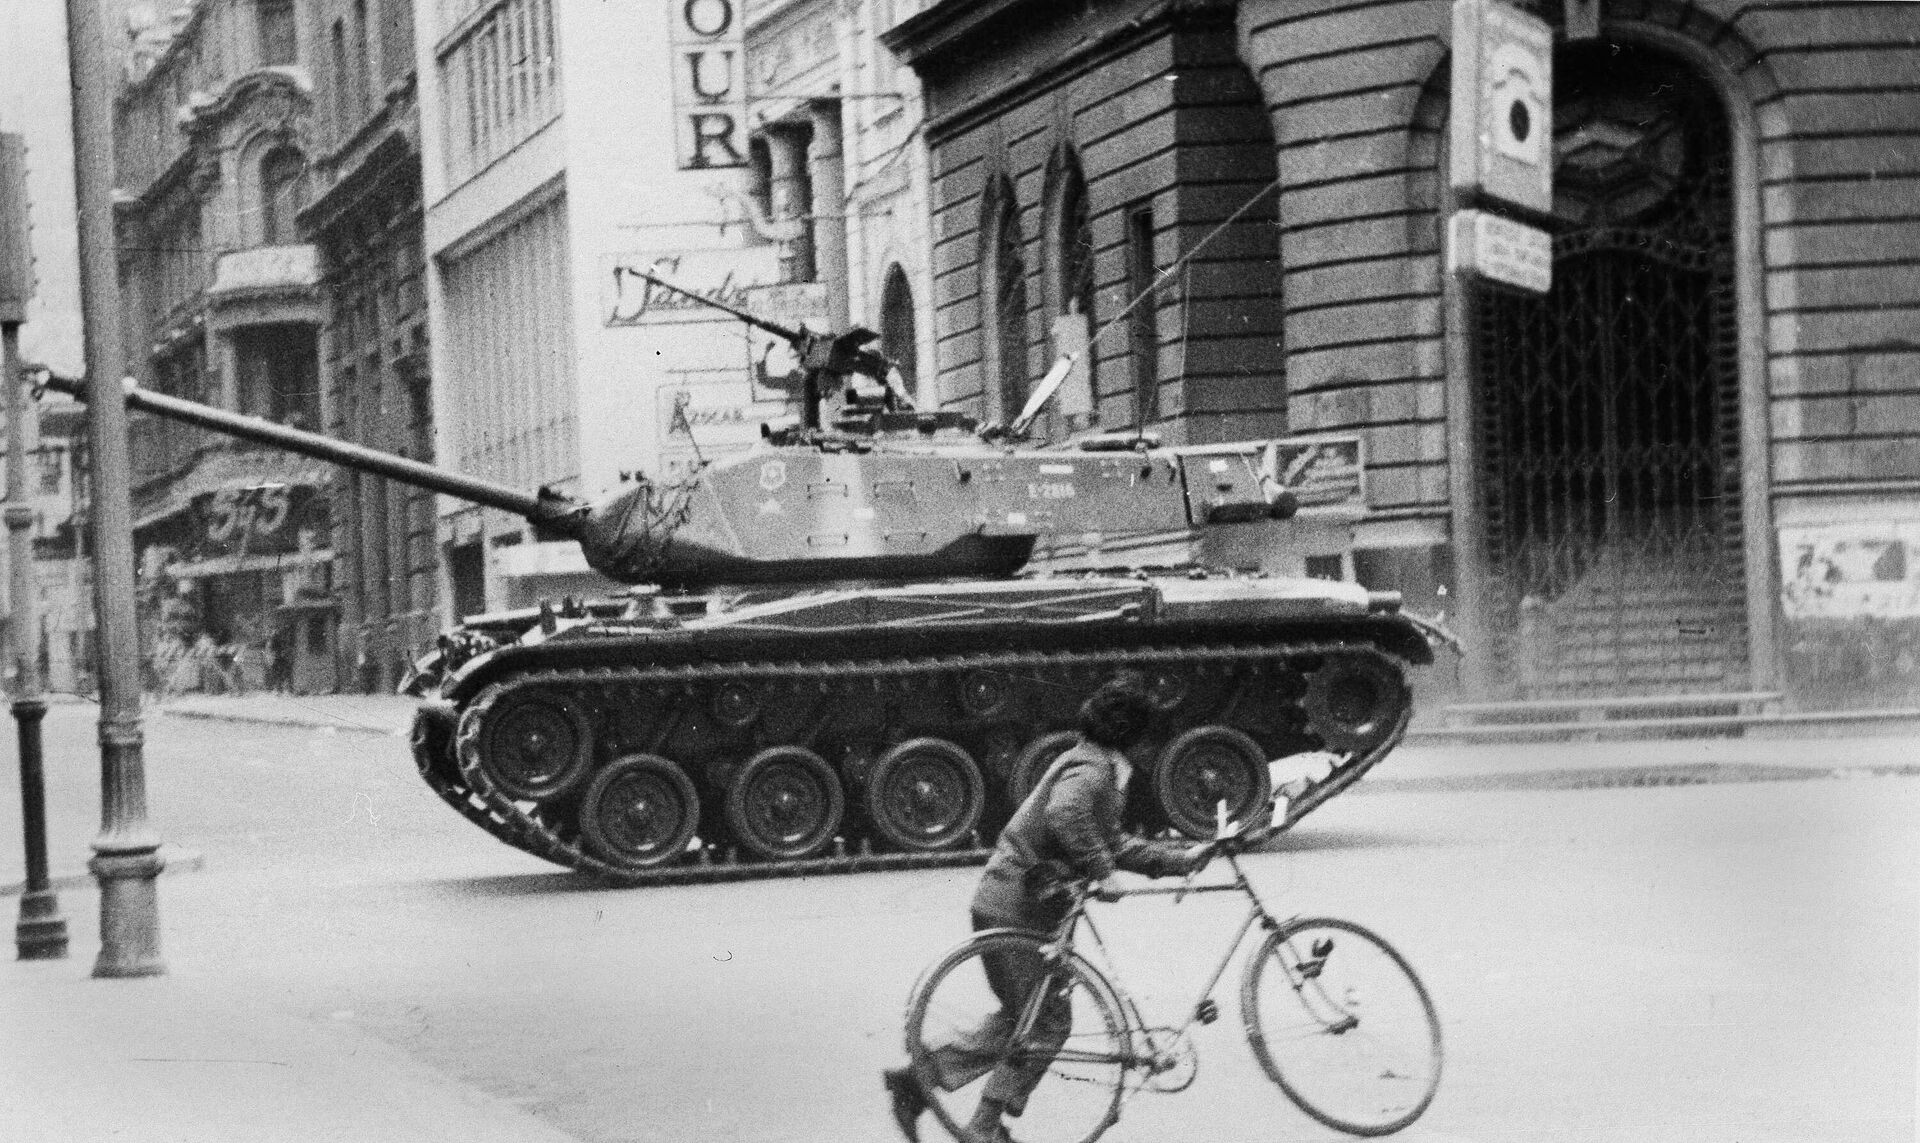 FILE - In this Sept. 11, 1973 file photo, a boy pushes a bicycle across a deserted street as an army tank moves towards La Moneda presidential palace during a coup against President Salvador Allende's government, after which Gen. Augusto Pinochet seized power, in Santiago, Chile. Chile marks the 45th anniversary of the coup led by Pinochet overthrowing Allende, on Wednesday, Sept. 11, 2018. - Sputnik International, 1920, 03.12.2023